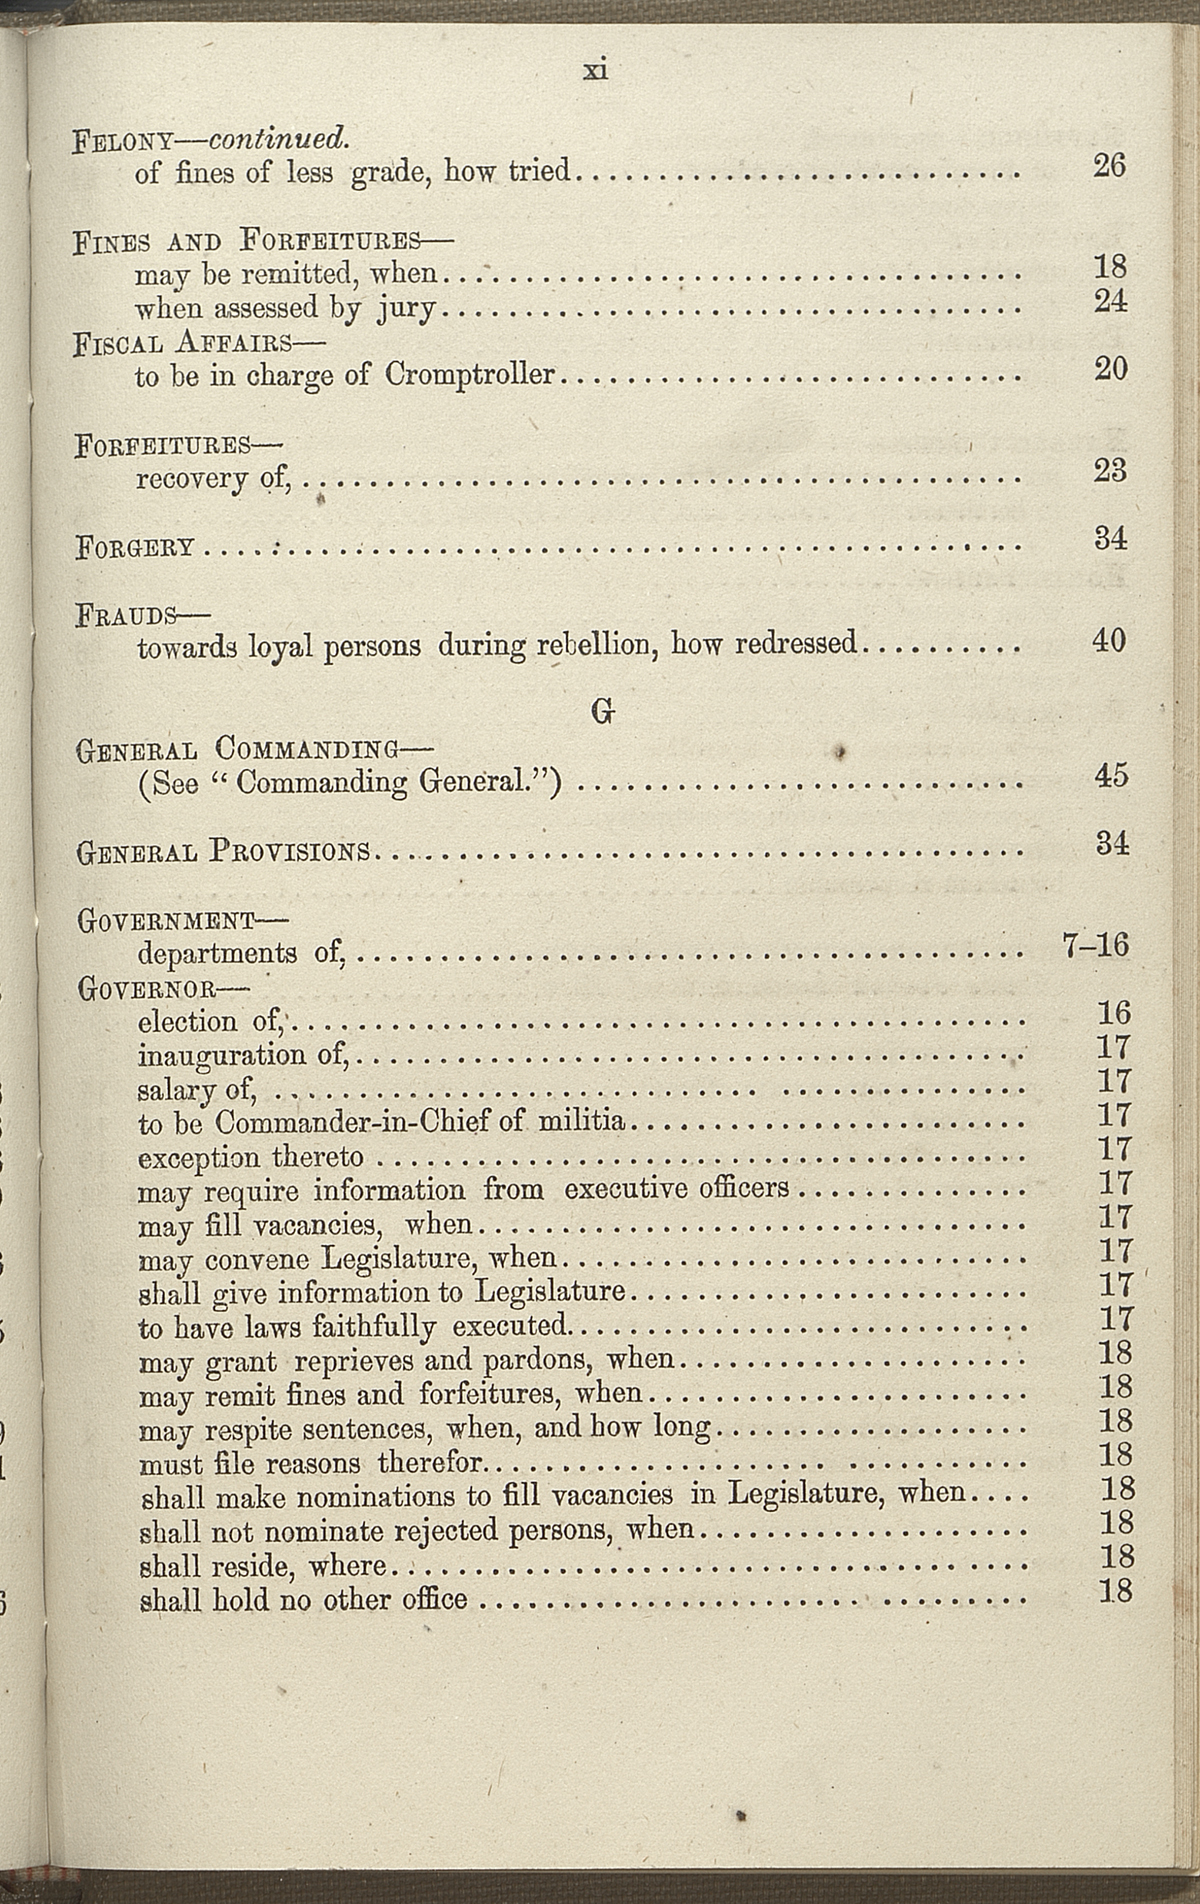 page 11 - 1869 index